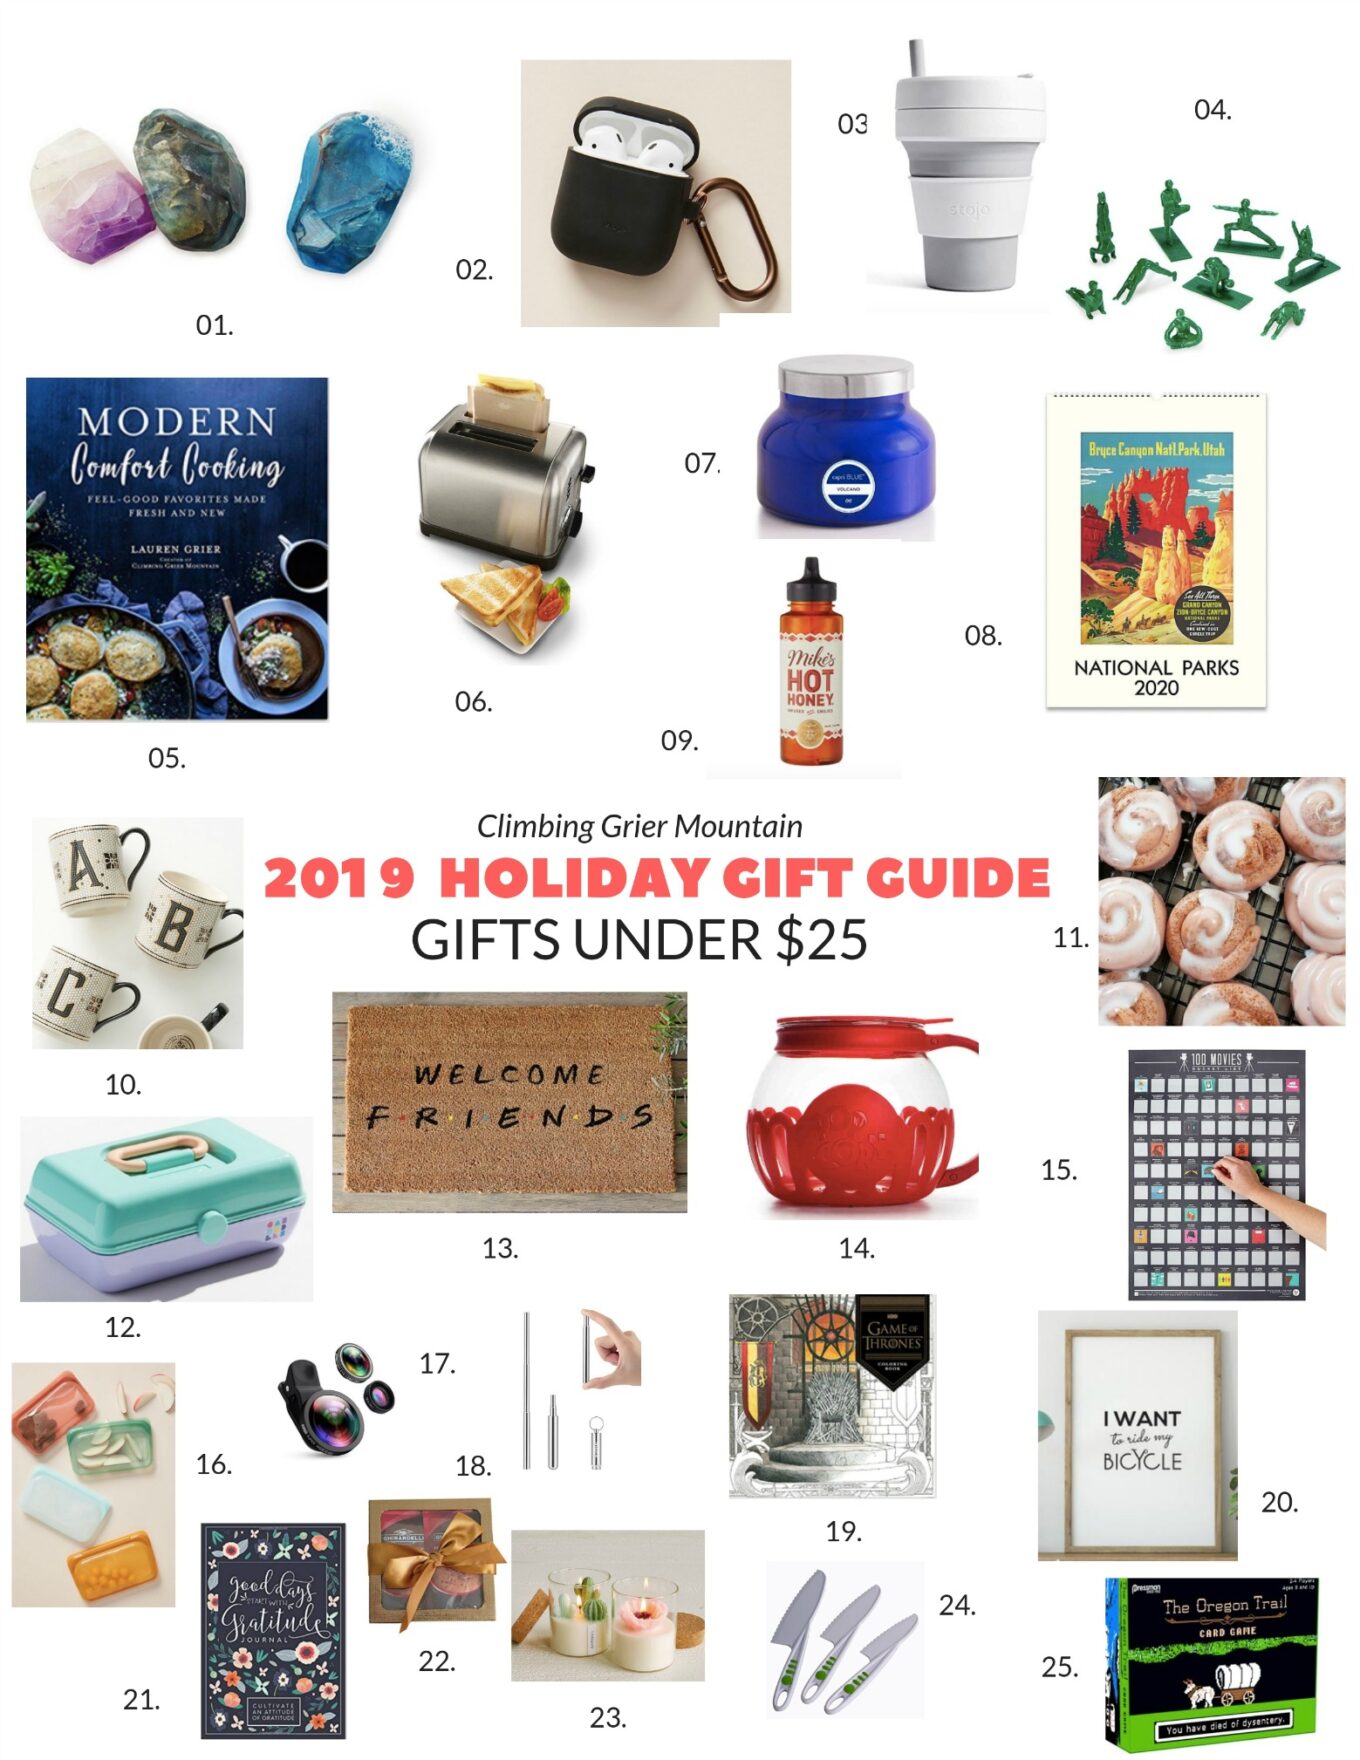 Best Gifts under $25 For Her - By Lauren M